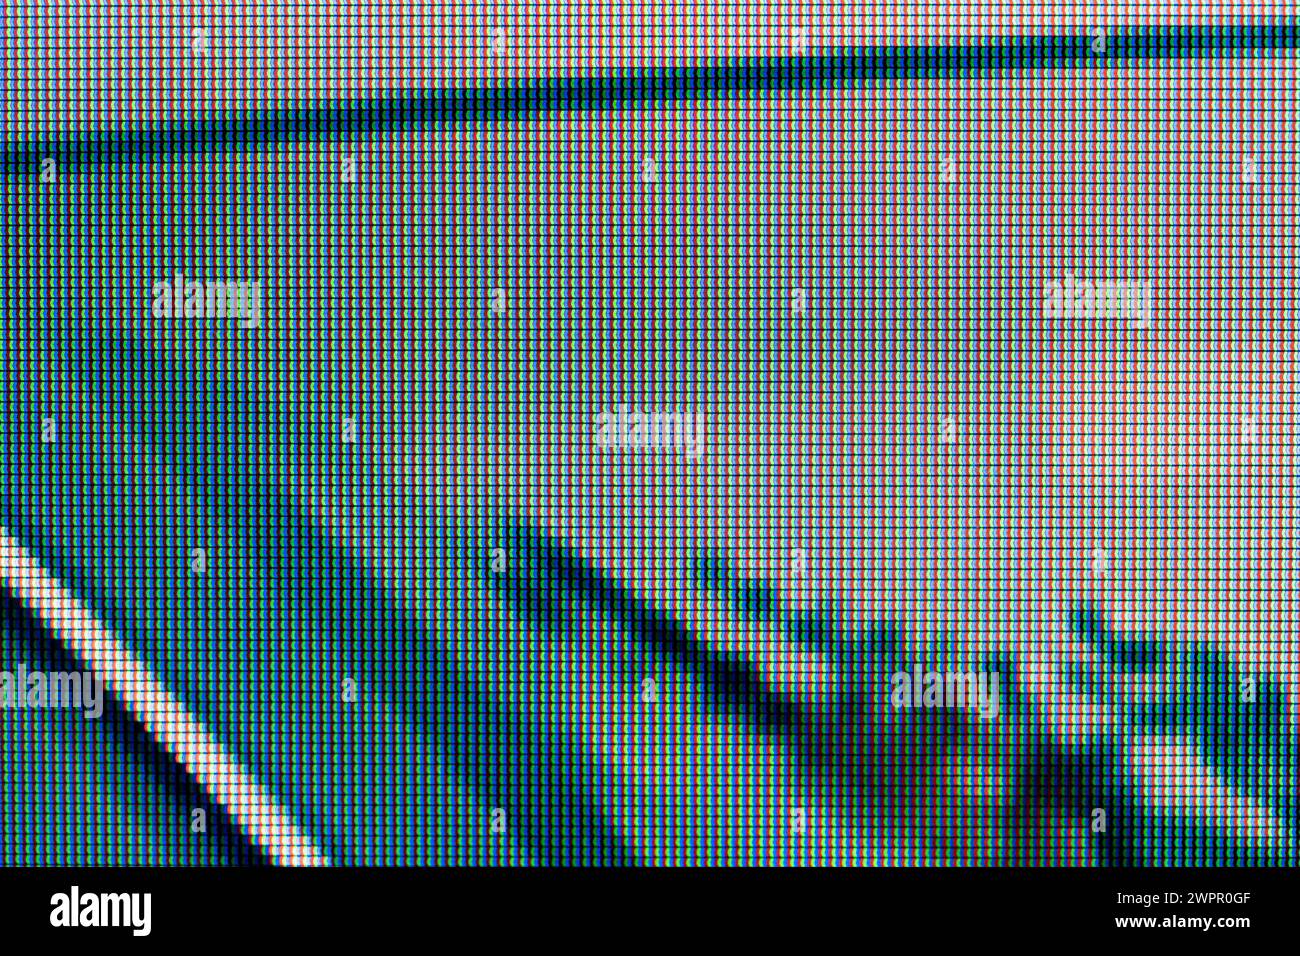 A magnified look at the pixels of an LCD screen, dark green grey white black creepy scary unnerving digital tech background monitor display texture ma Stock Photo